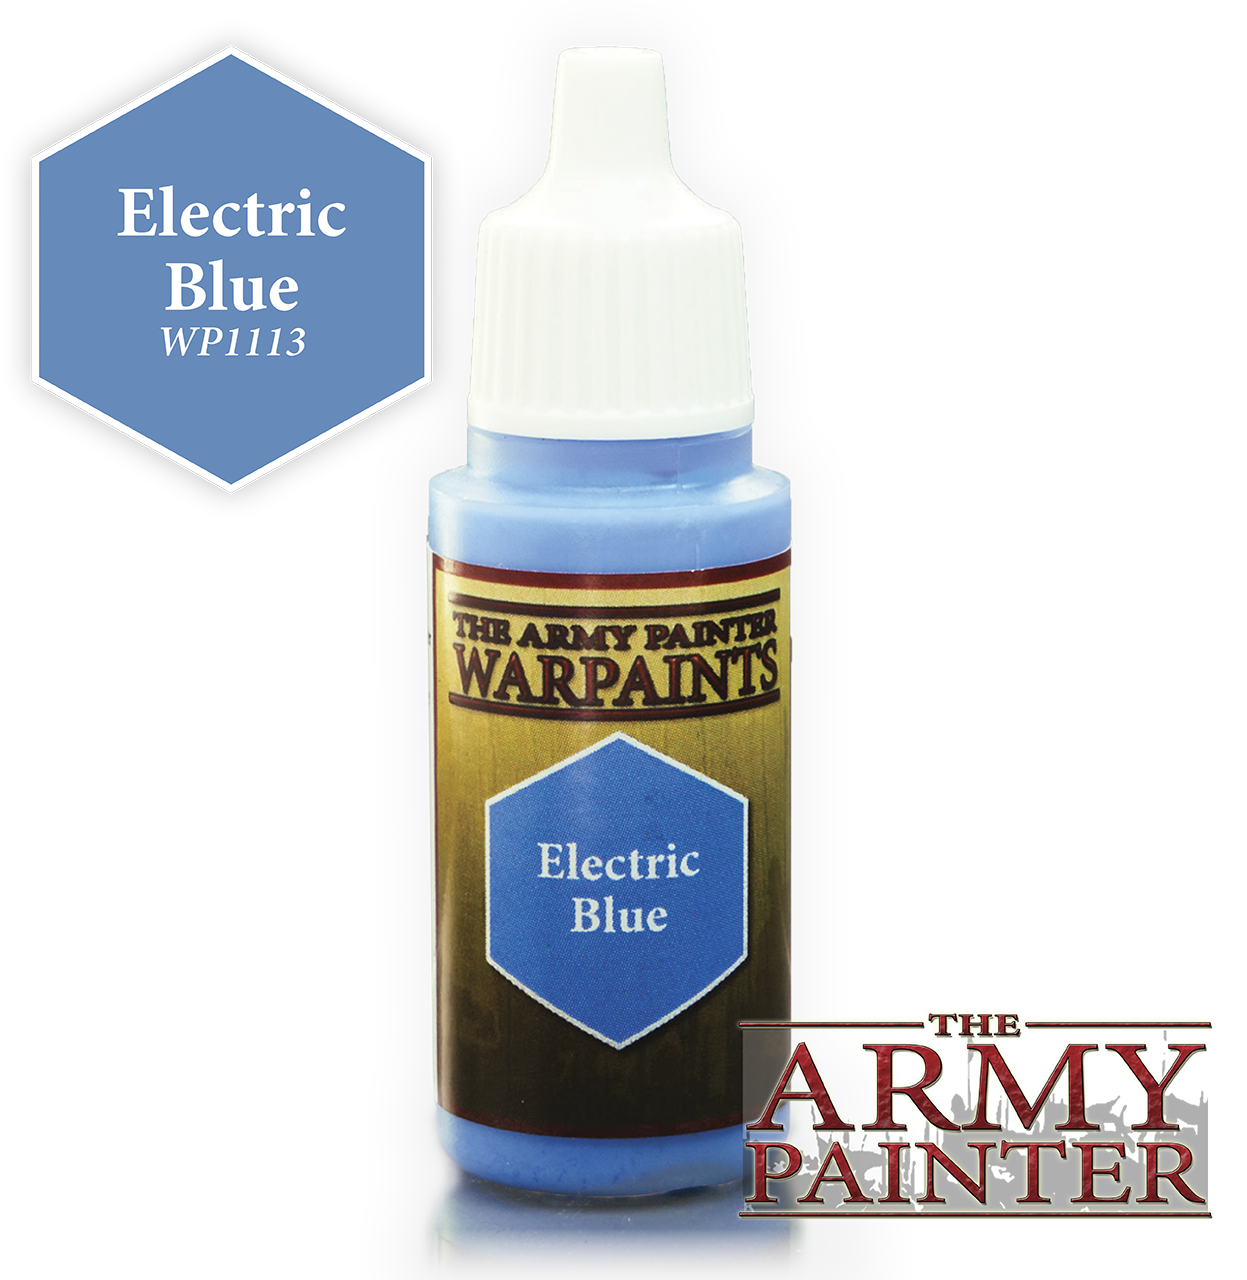 The ARMY PAINTER: Acrylics Warpaint - Electric Blue | Tacoma Games